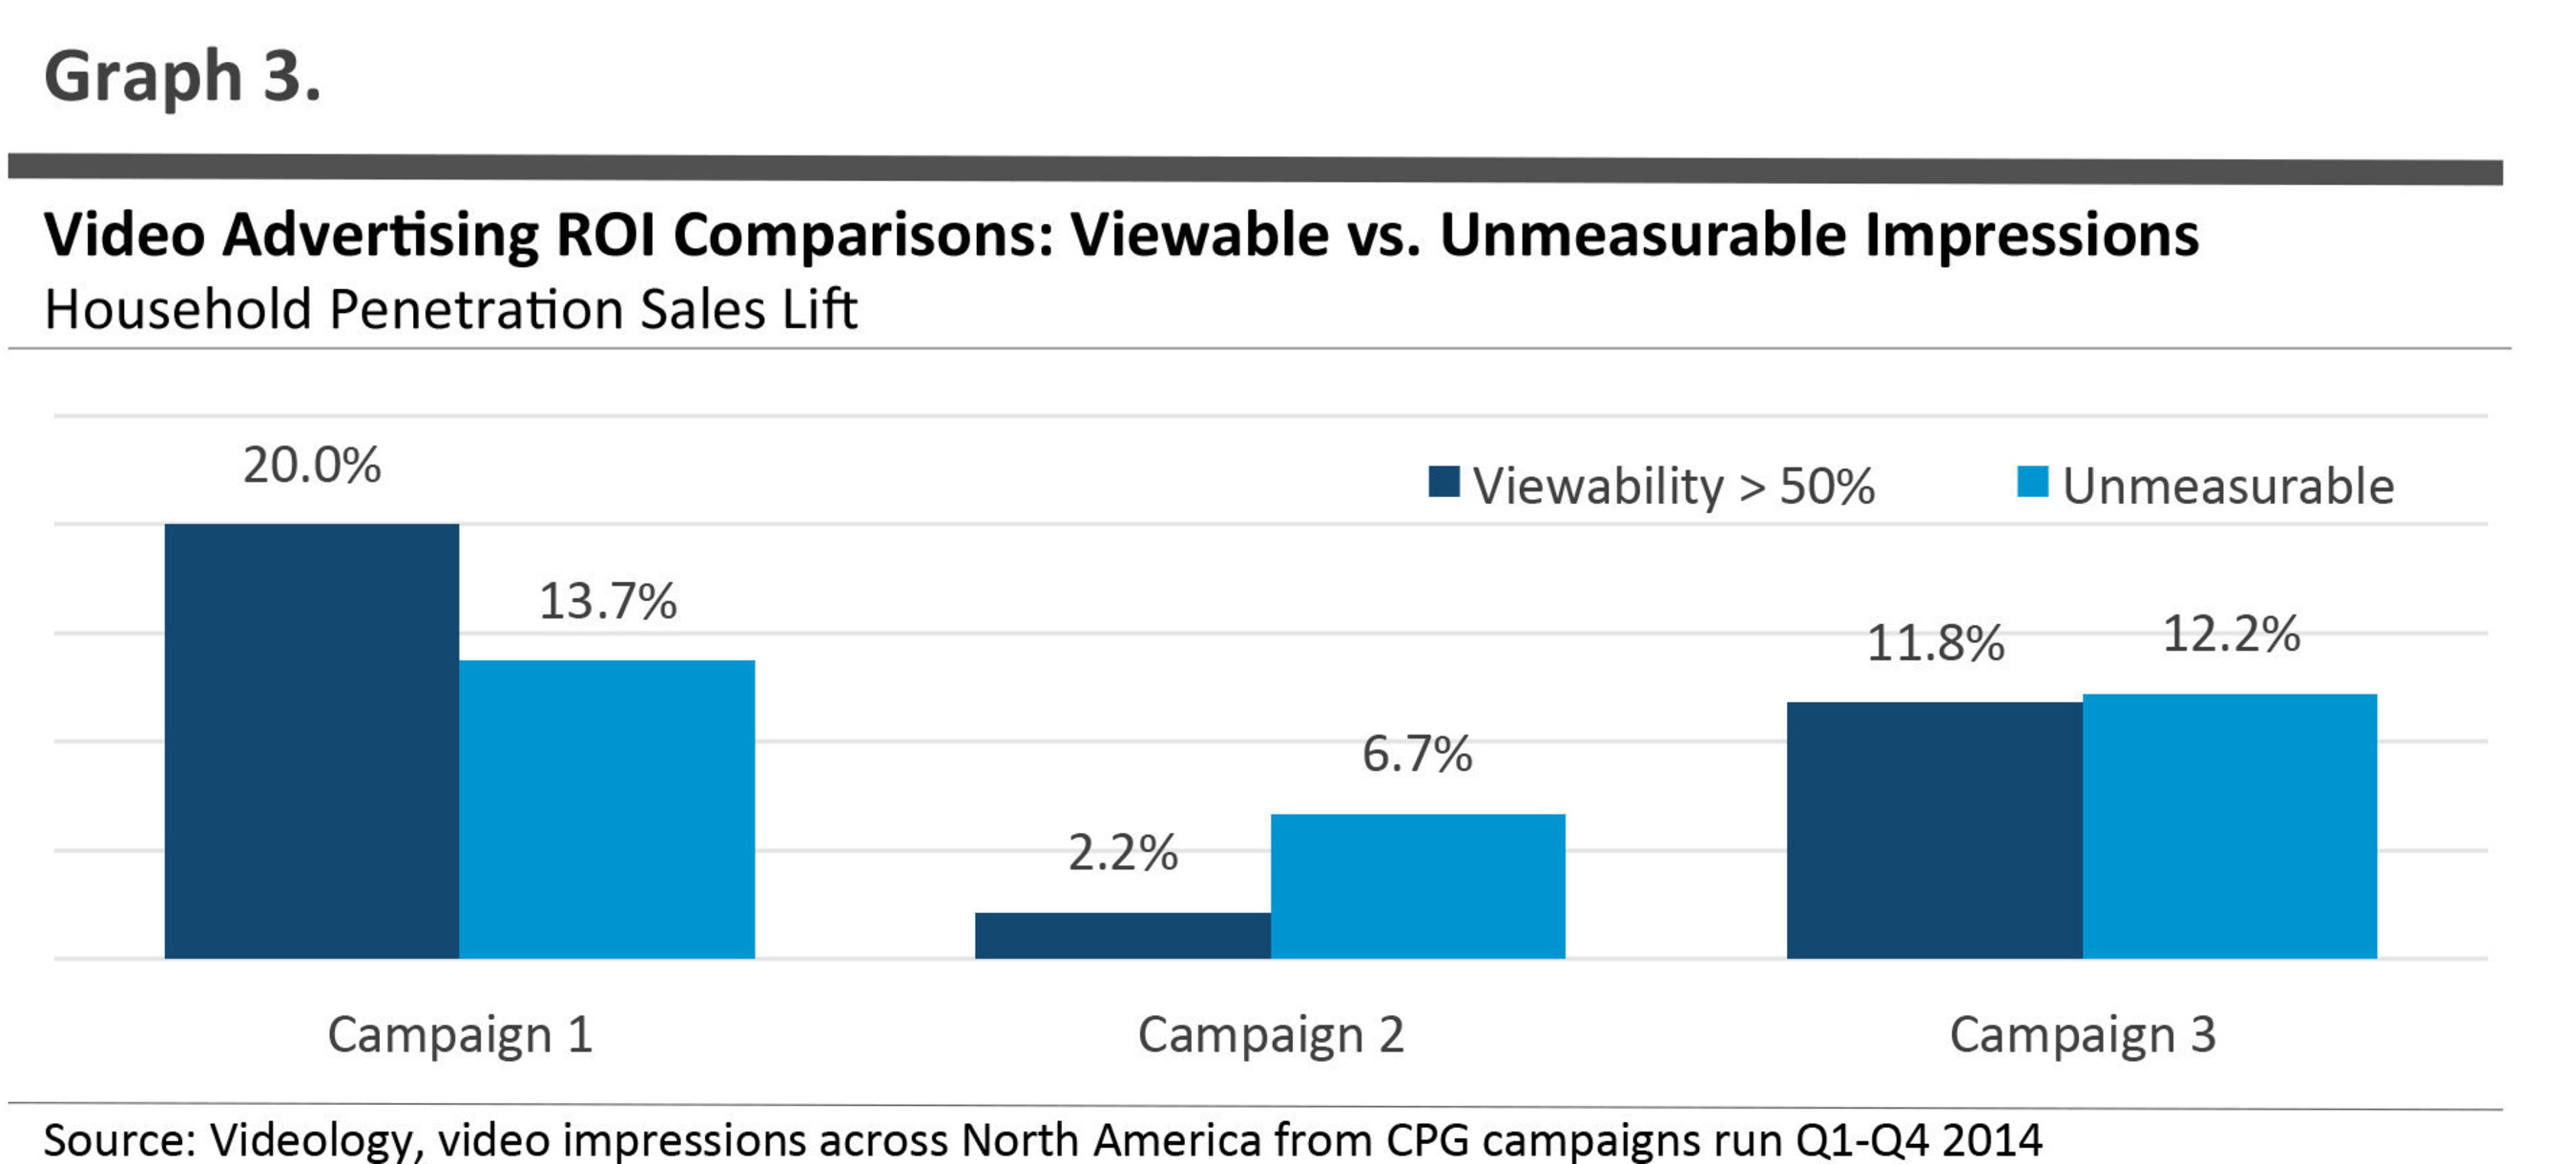 Inventory that cannot be measured for viewability can perform on par or better than campaigns with above average viewability ratings in terms of driving offline sales.